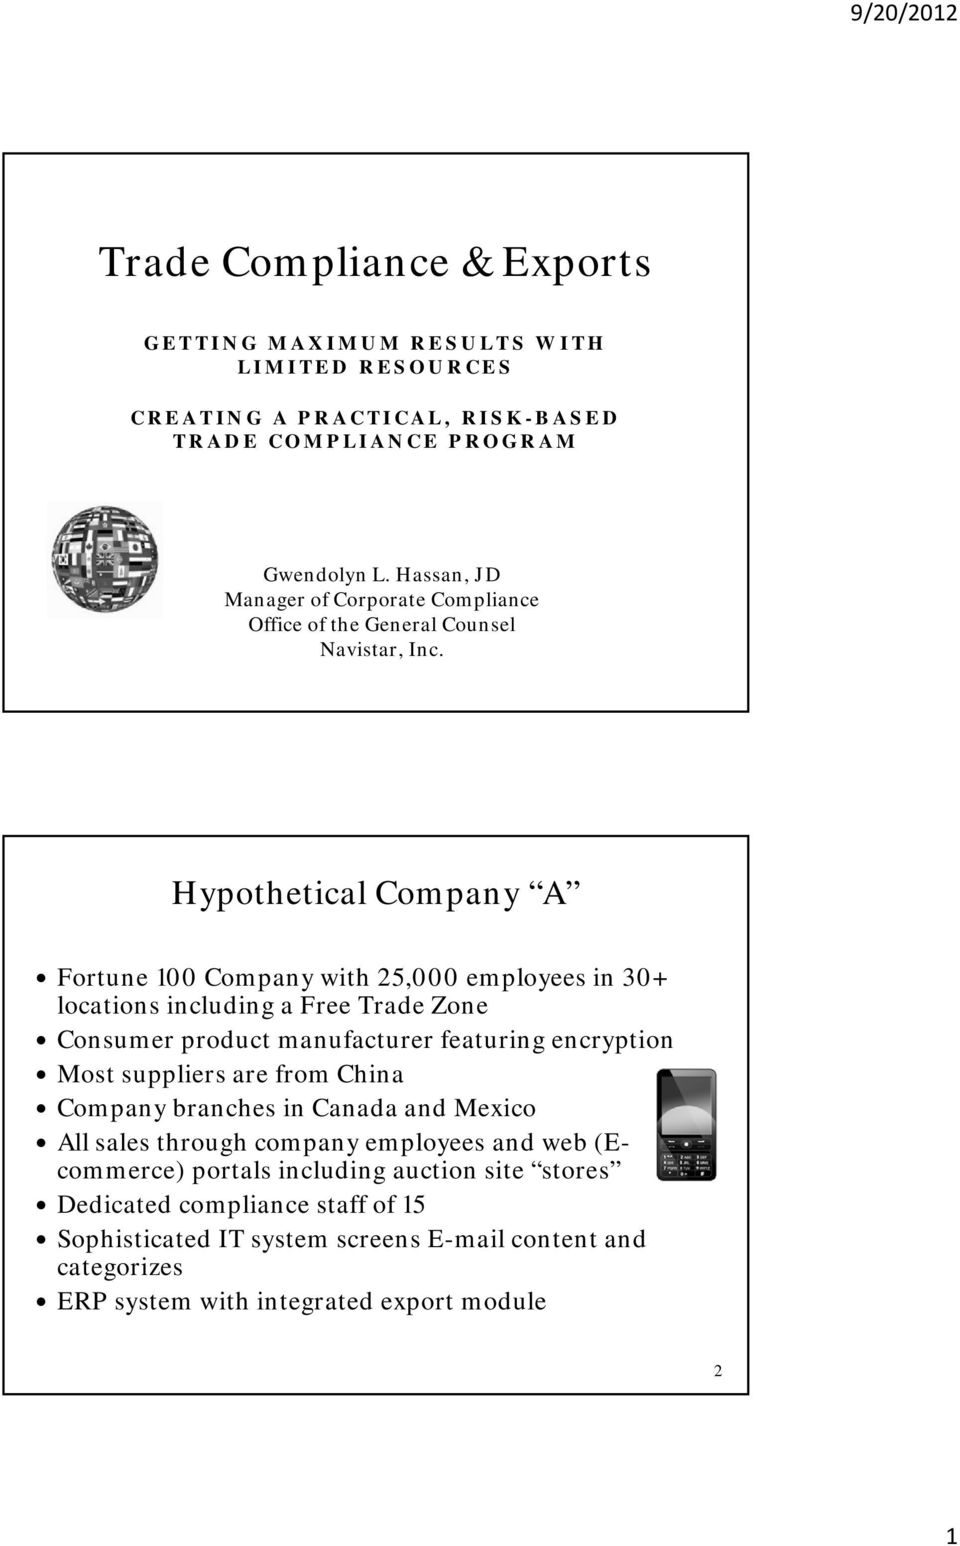 Hypothetical Company A Fortune 100 Company with 25,000 employees in 30+ locations including a Free Trade Zone Consumer product manufacturer featuring encryption Most